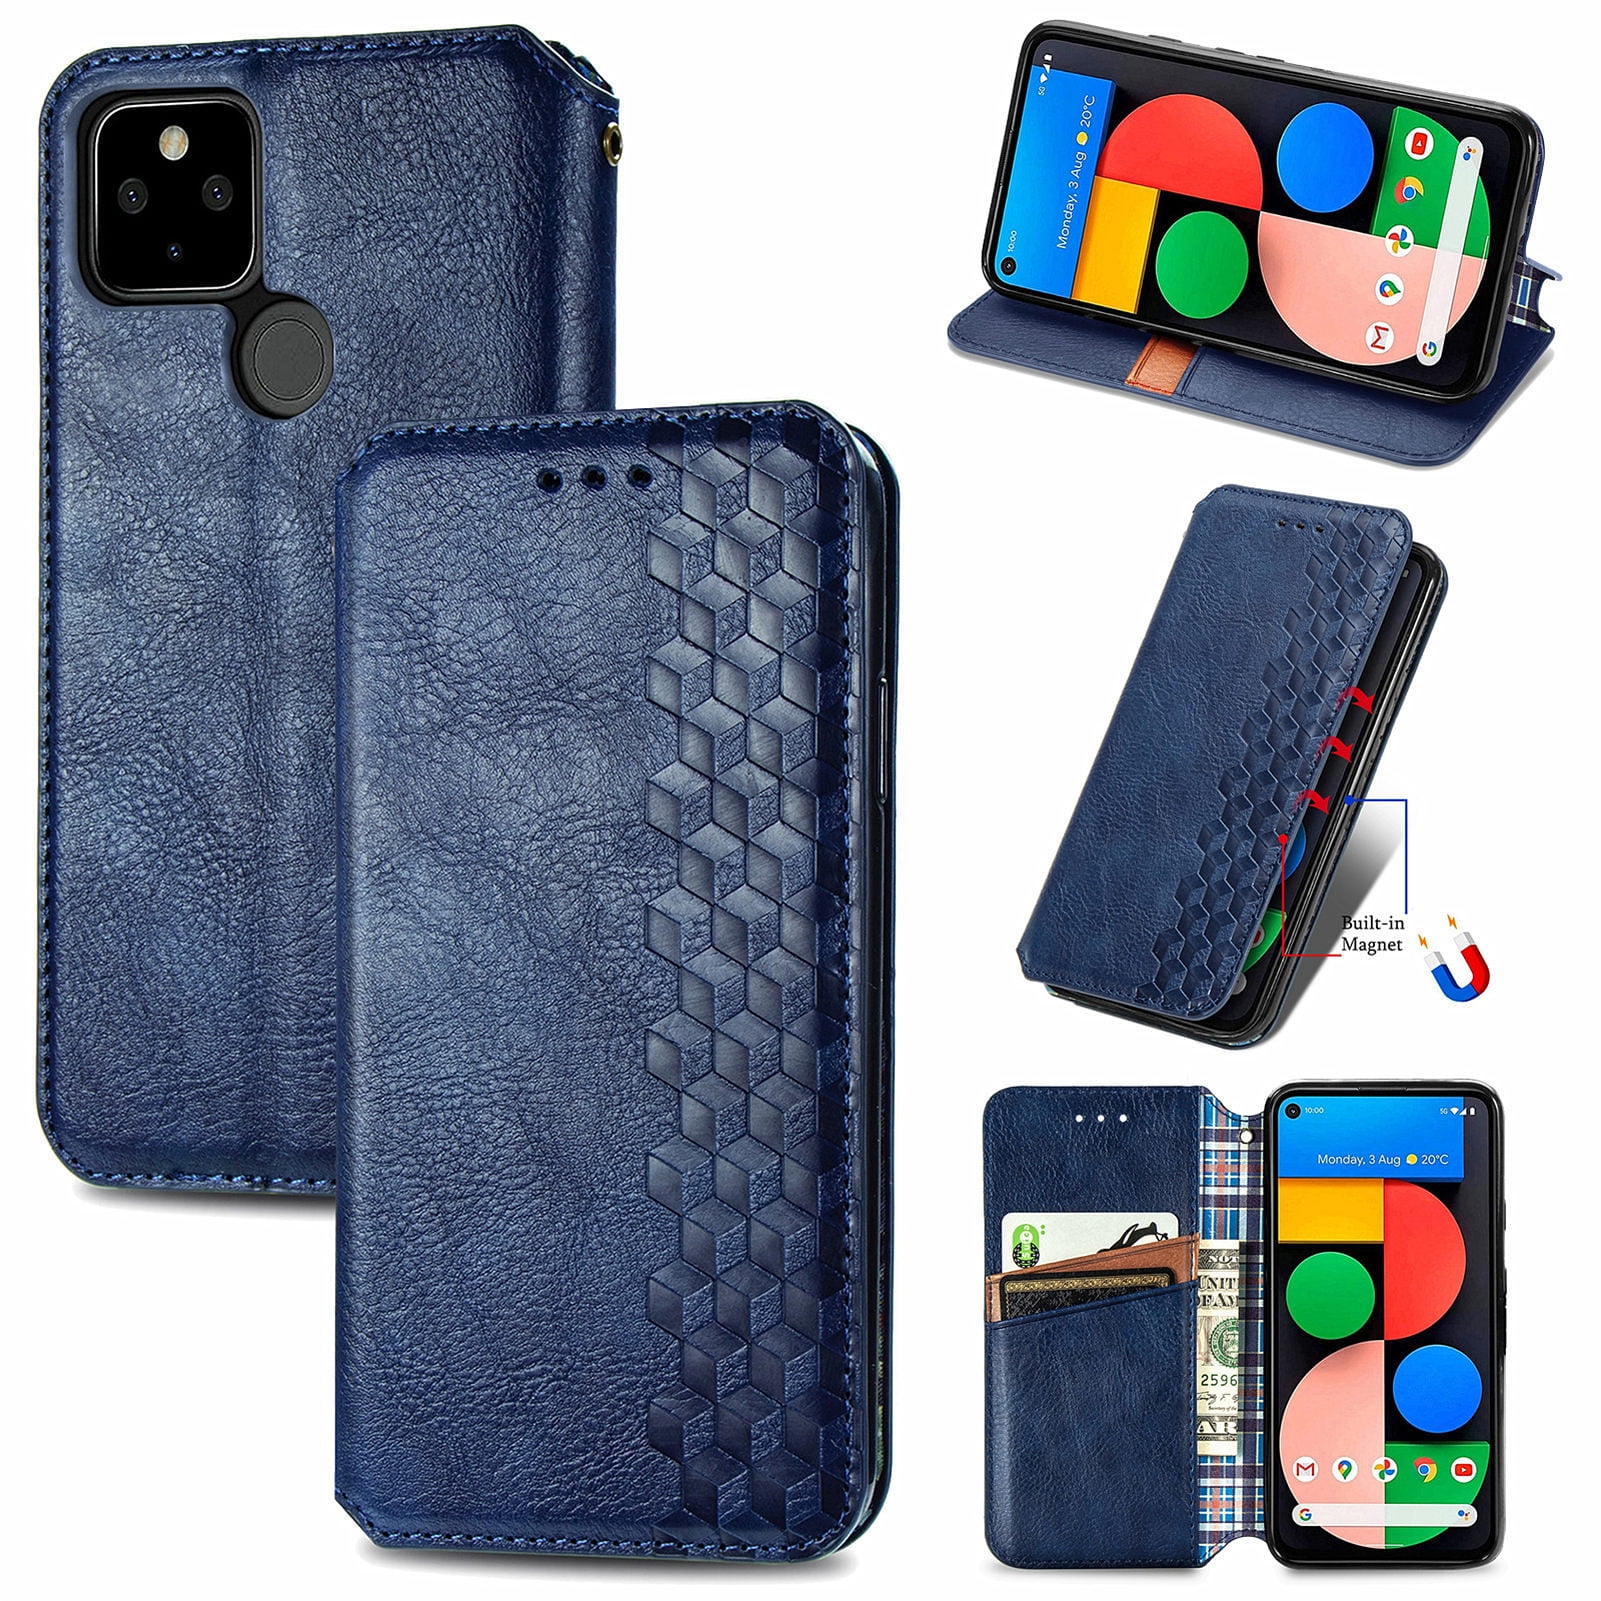 HOOMIL Pixel 5A Case Black Shockproof TPU Inner Shell Google Pixel 5A Wallet Case Magnetic PU Leather Flip Cover with Card Holders RFID Blocking Kickstand for Google 5A 5G Phone Case 